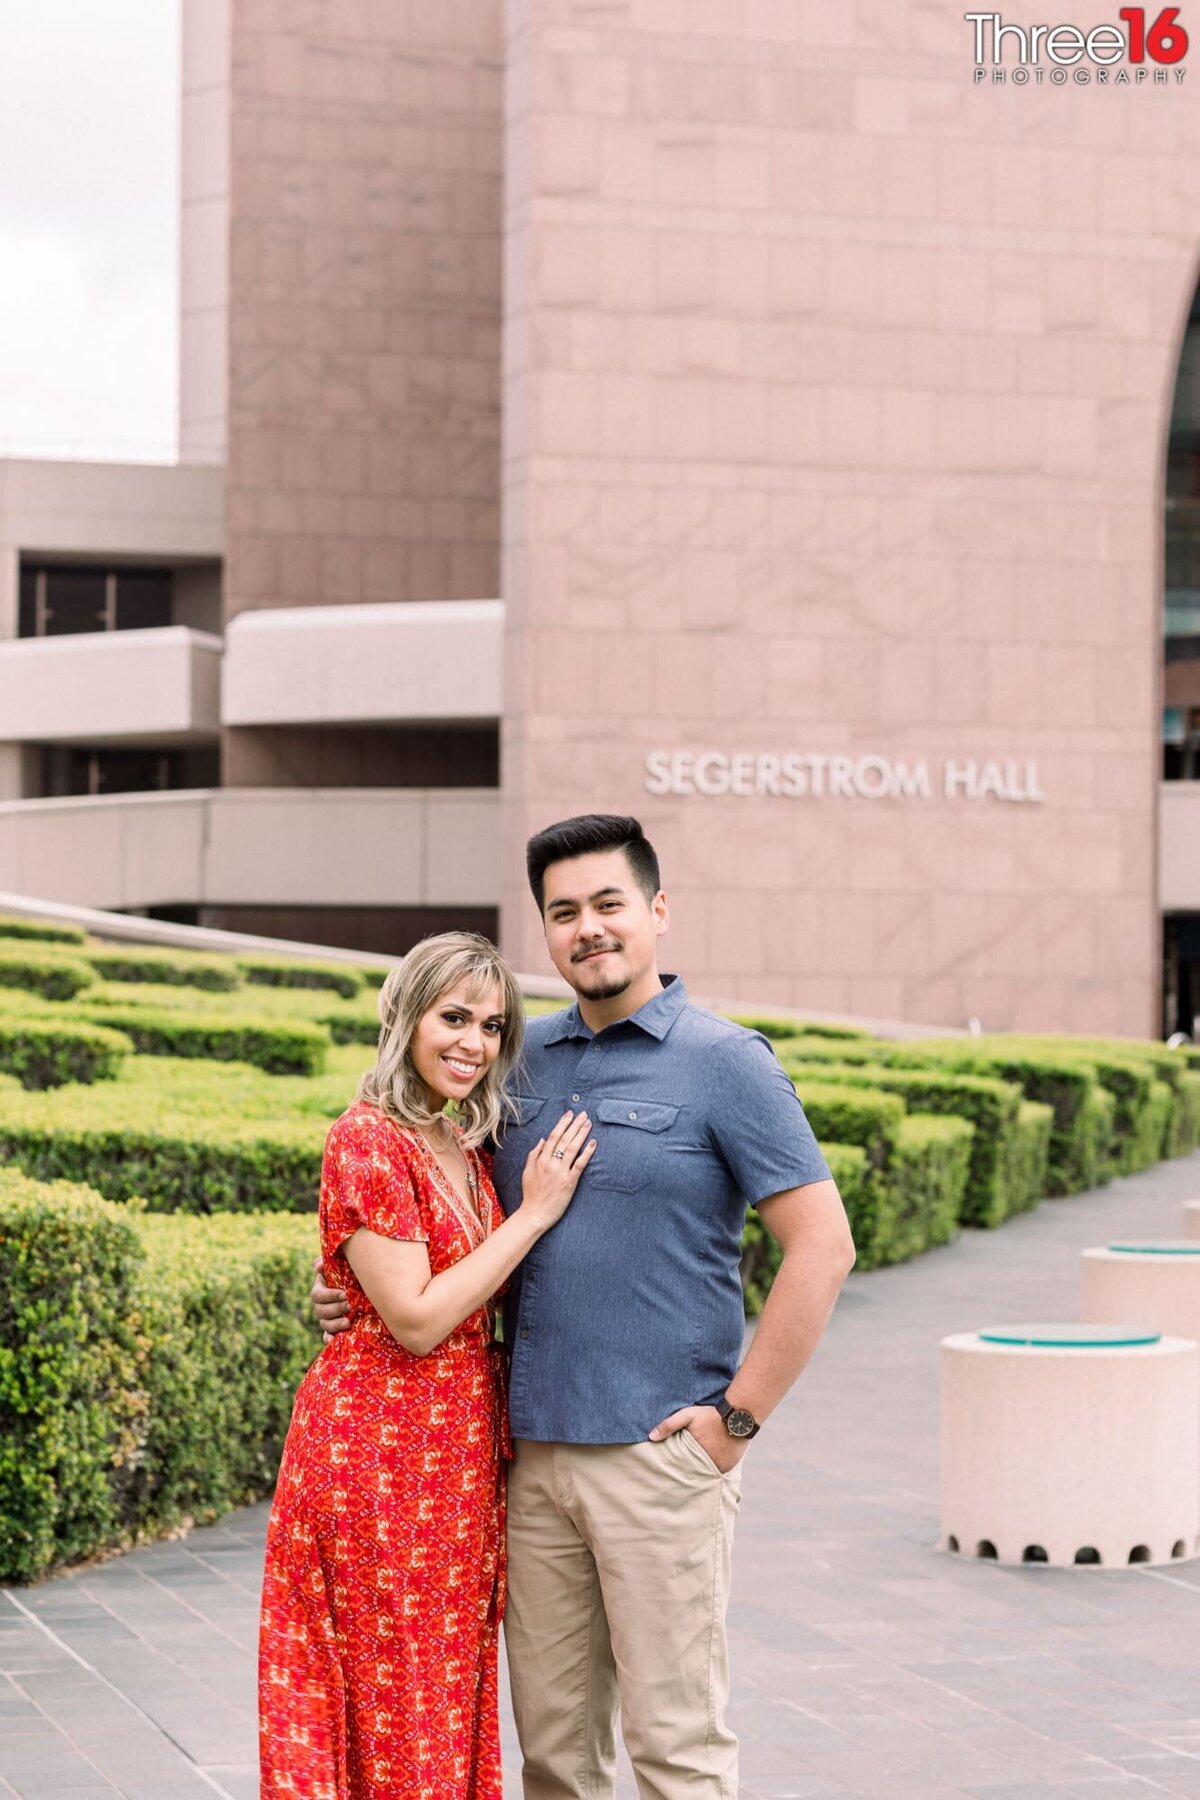 A Segerstrom Center for the Arts engagement photo session in Costa Mesa